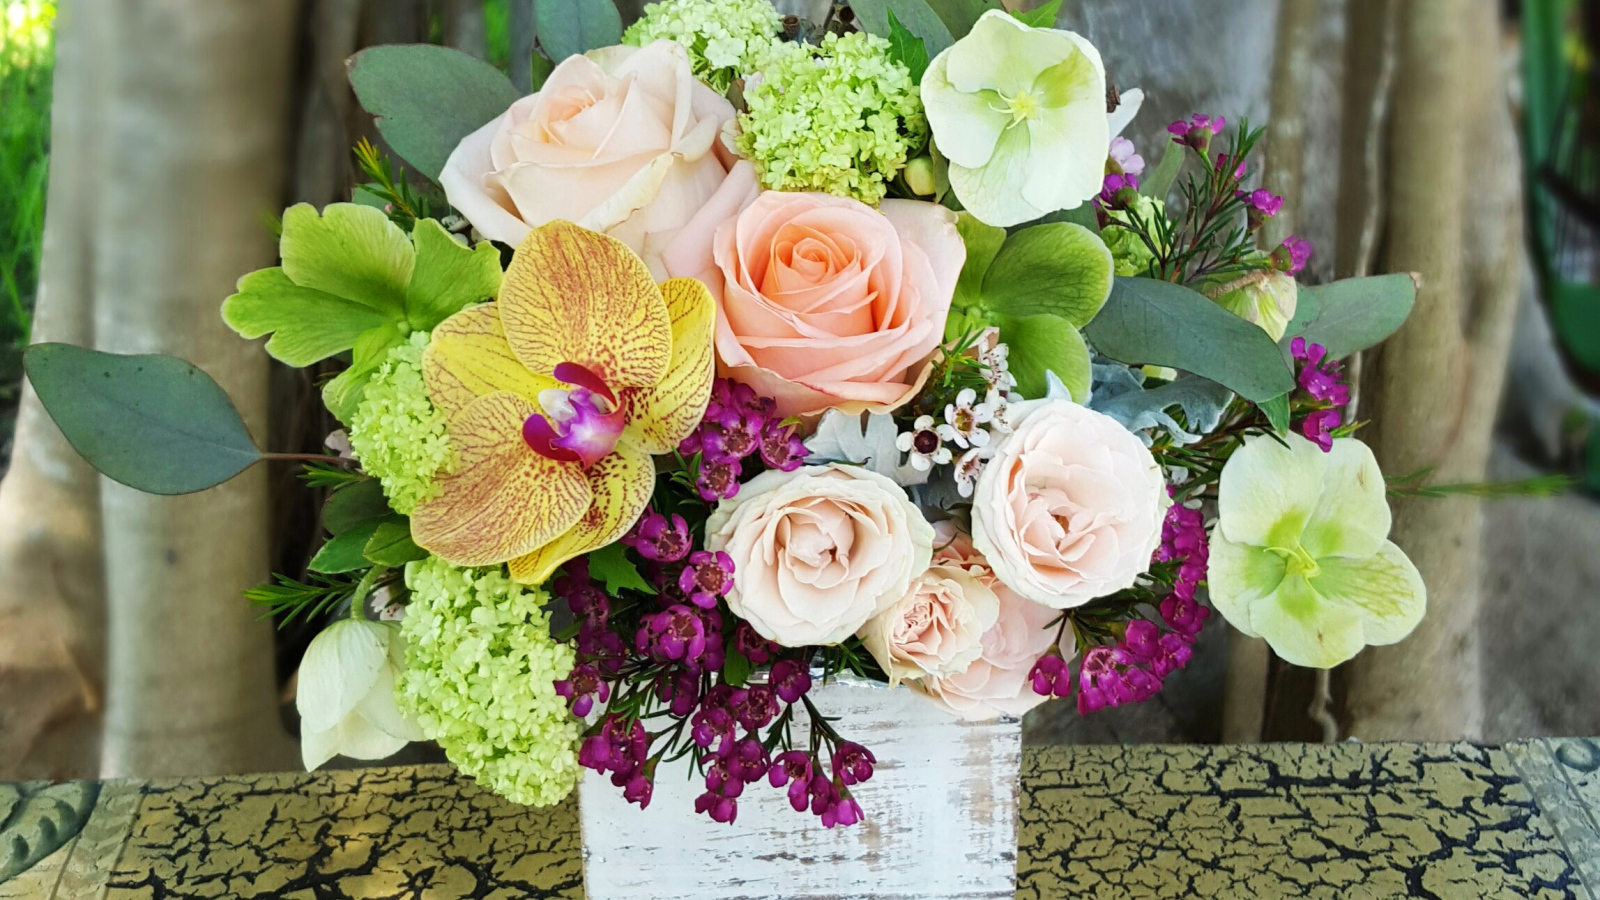 A beautiful bouquet on the table in a vase